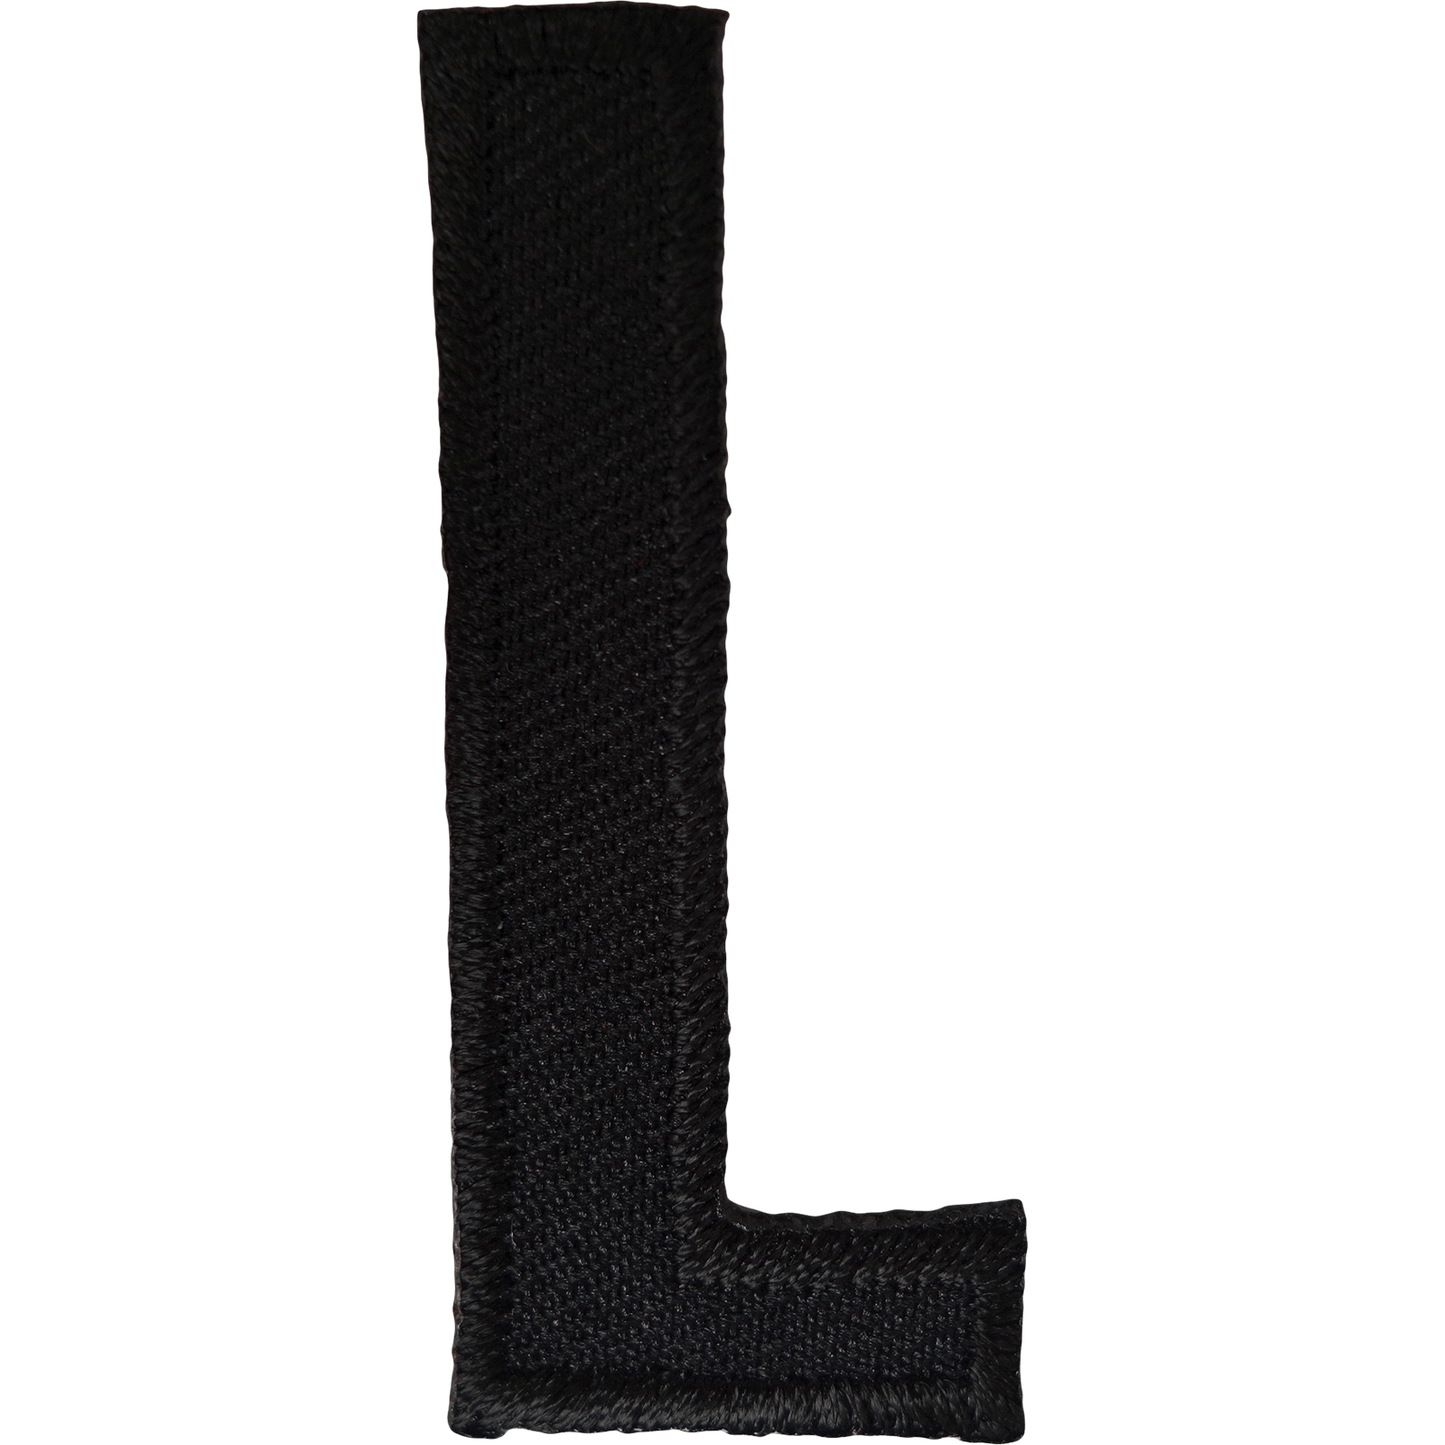 Letter L Black Letter Number Iron Sew On Patches Badges Name Letters Numbers Badge Patch